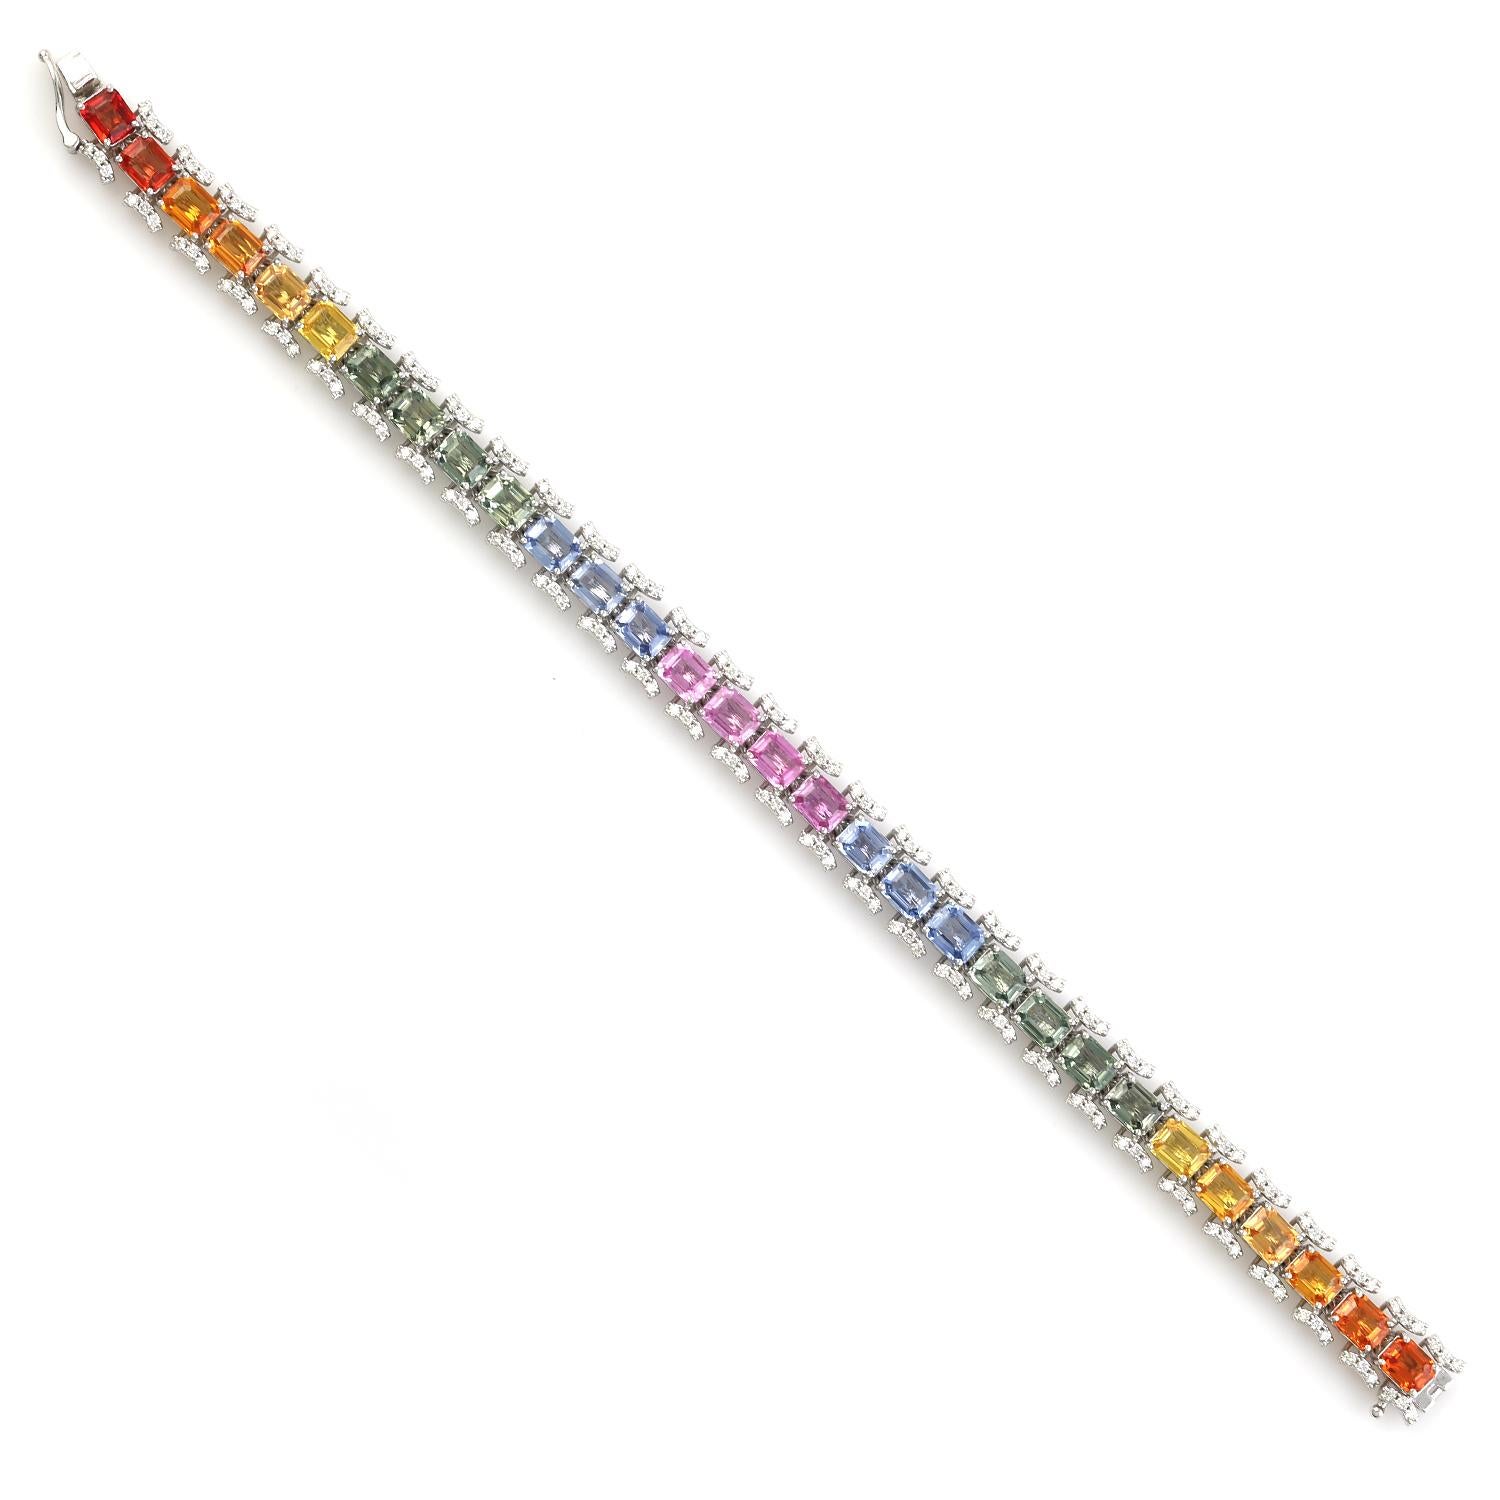 Contemporary 15.02 ct Rainbow Sapphire Bracelet With Diamonds Made In 18k White Gold For Sale